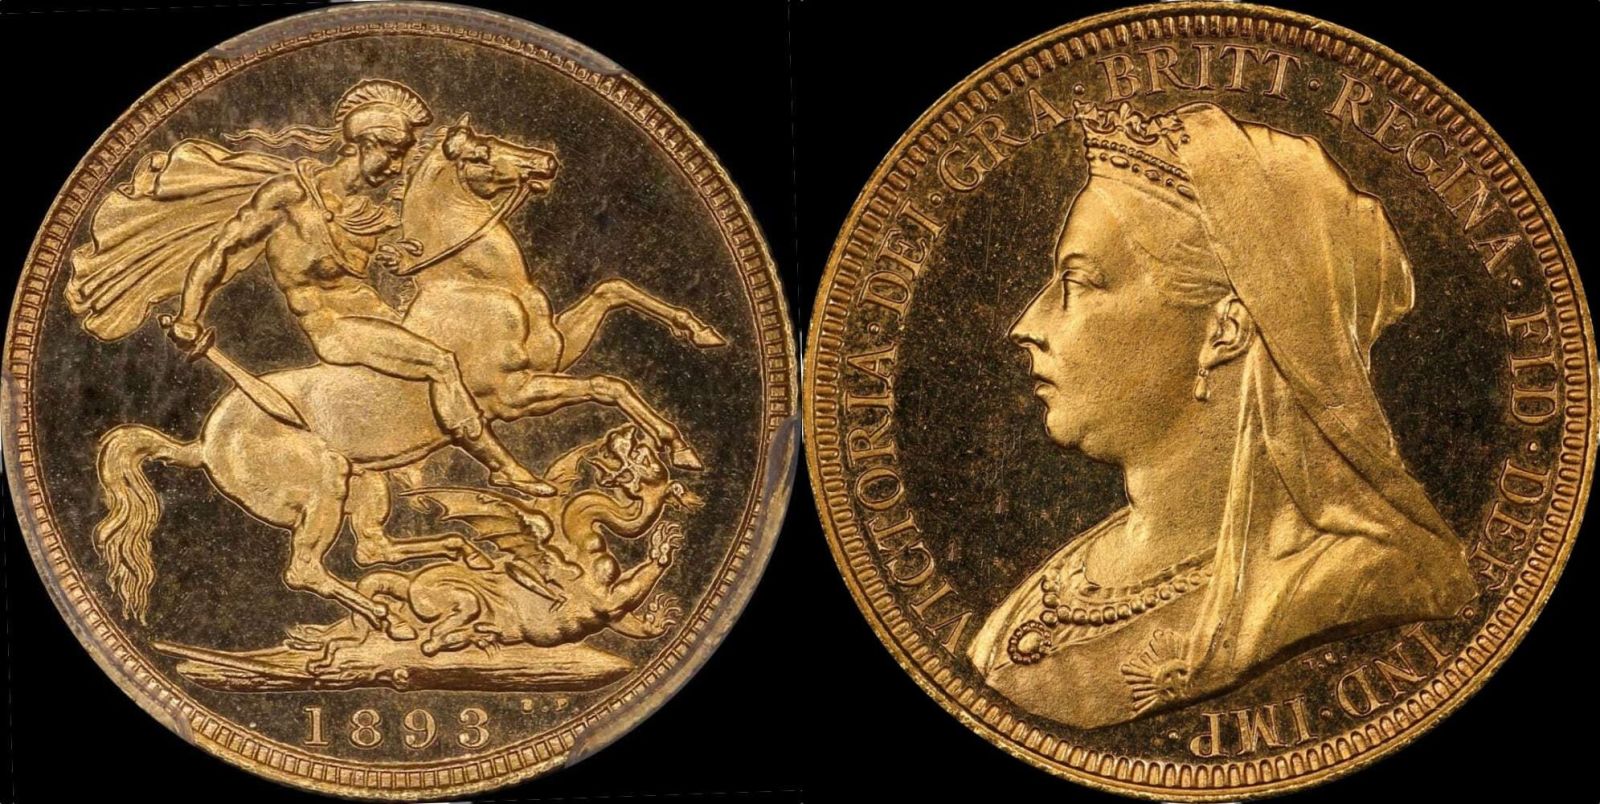 1893 Sydney Proof Sovereign